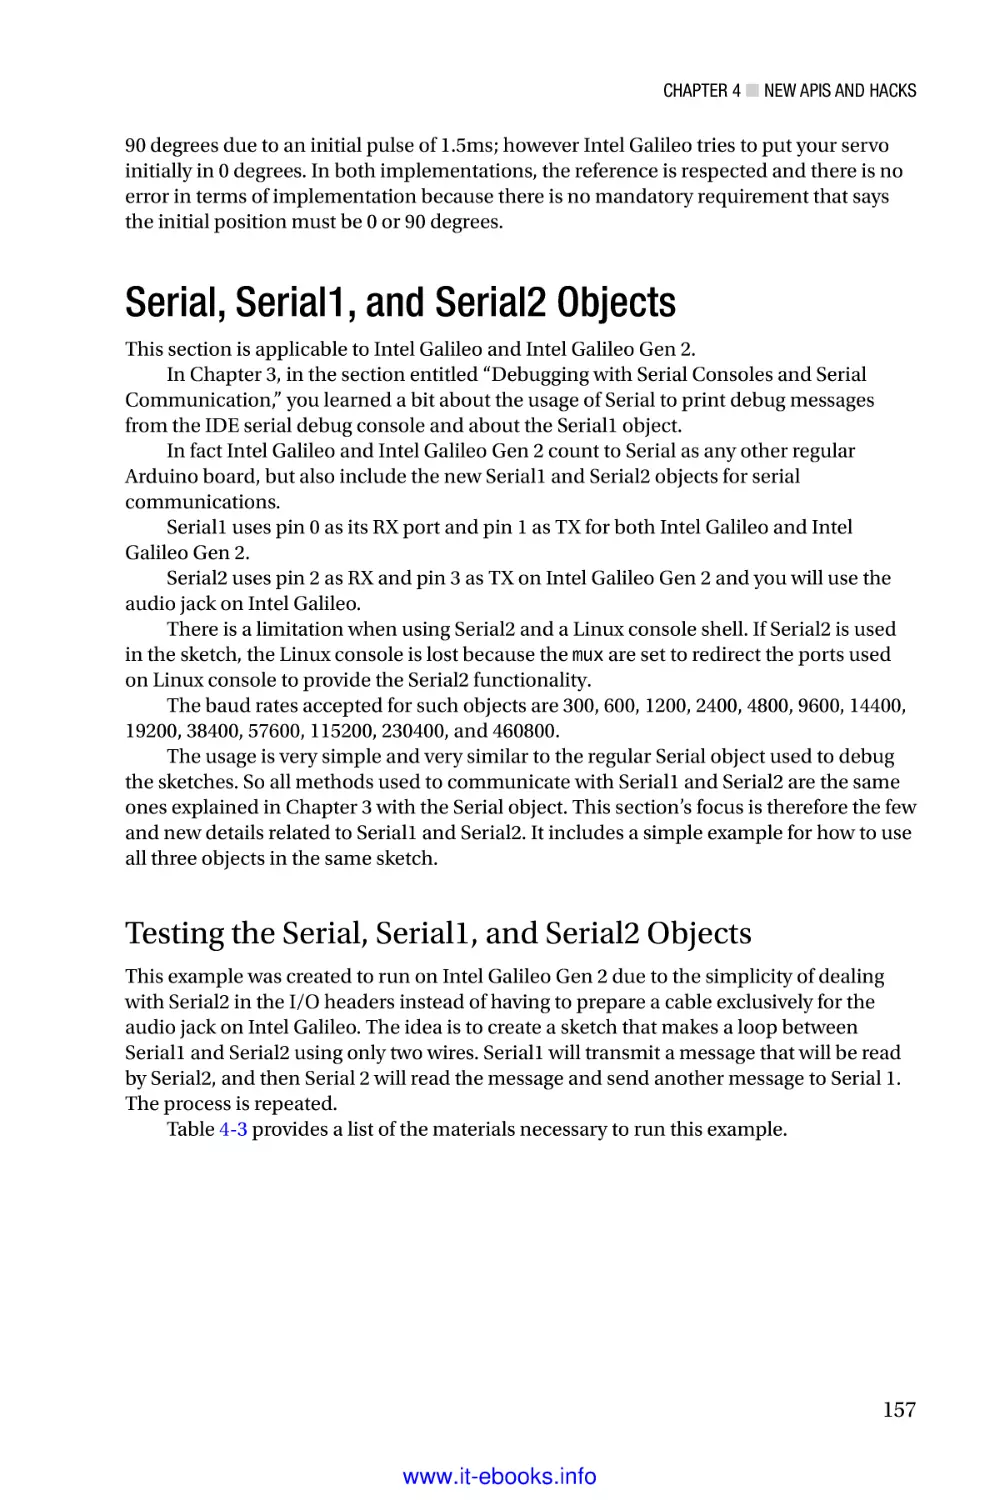 Serial, Serial1, and Serial2 Objects
Testing the Serial, Serial1, and Serial2 Objects